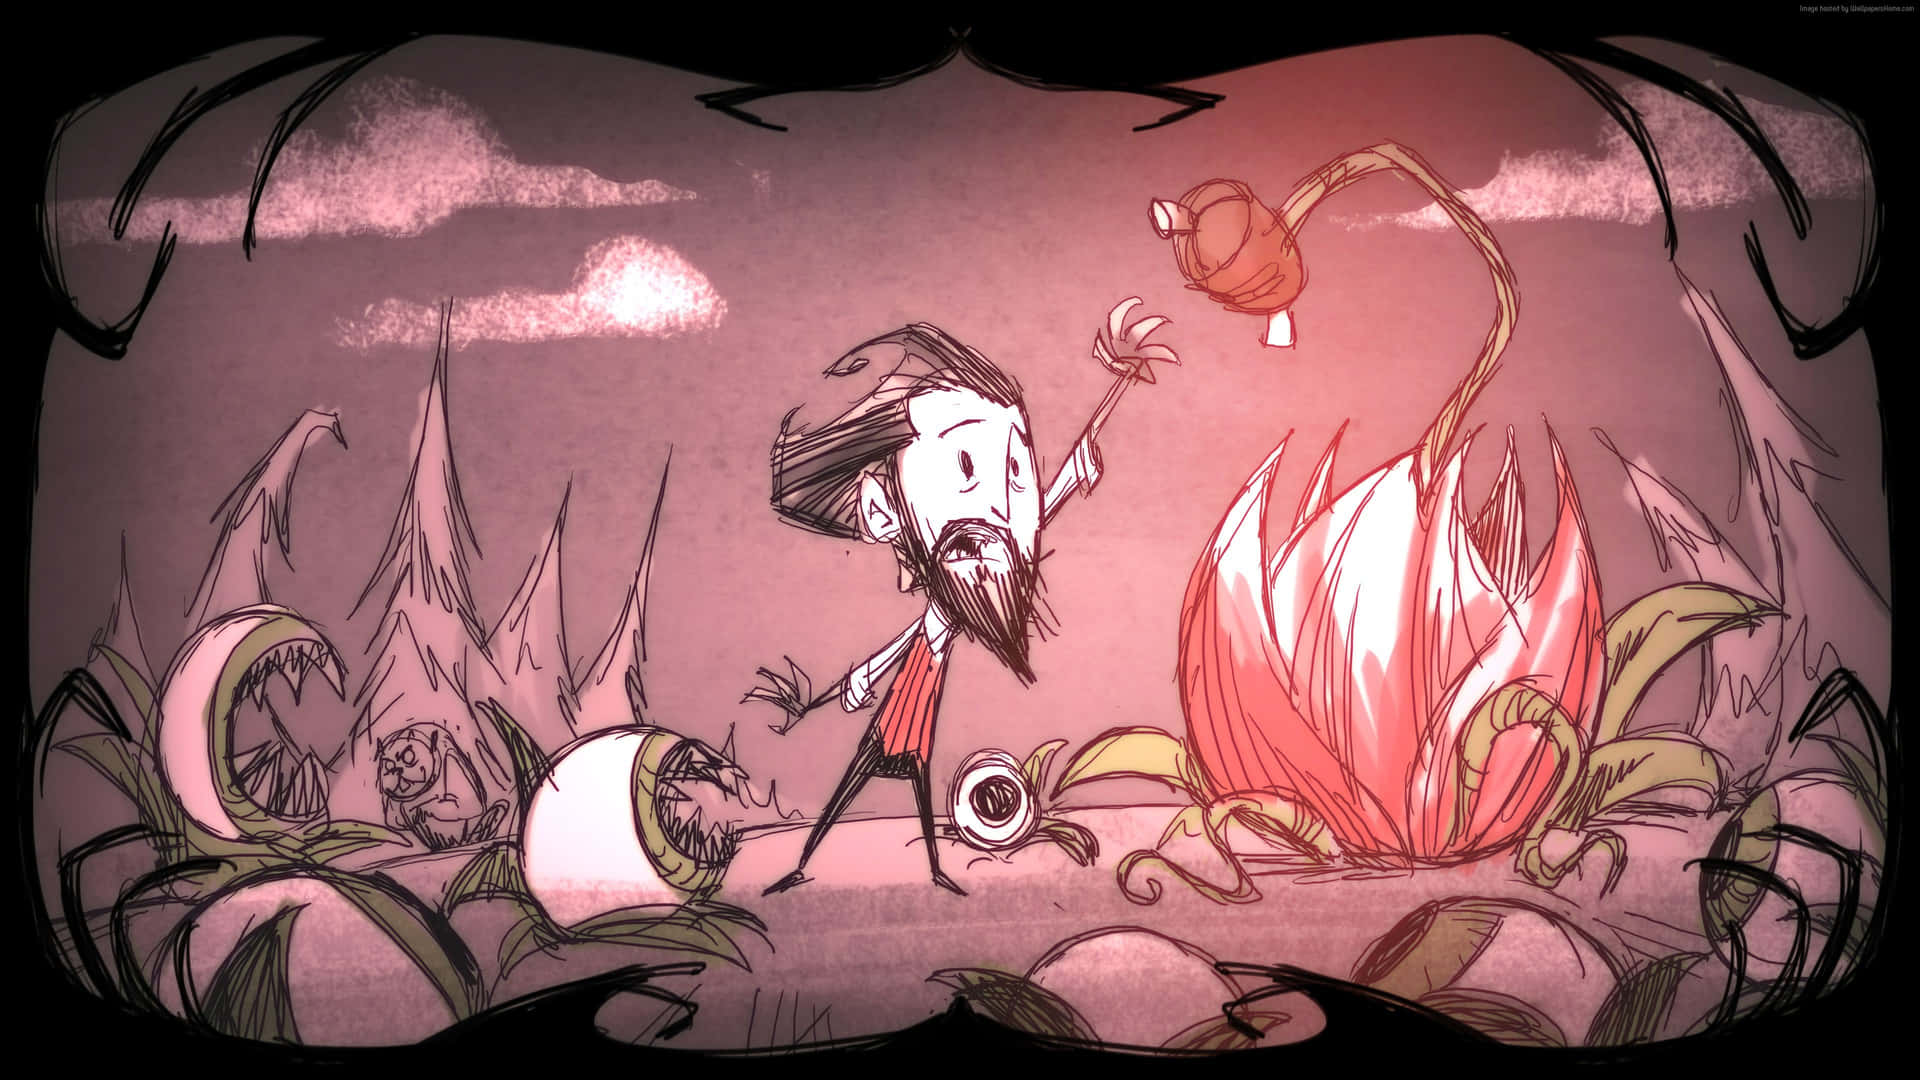 An Endless Adventure Awaits You in Don't Starve Wallpaper